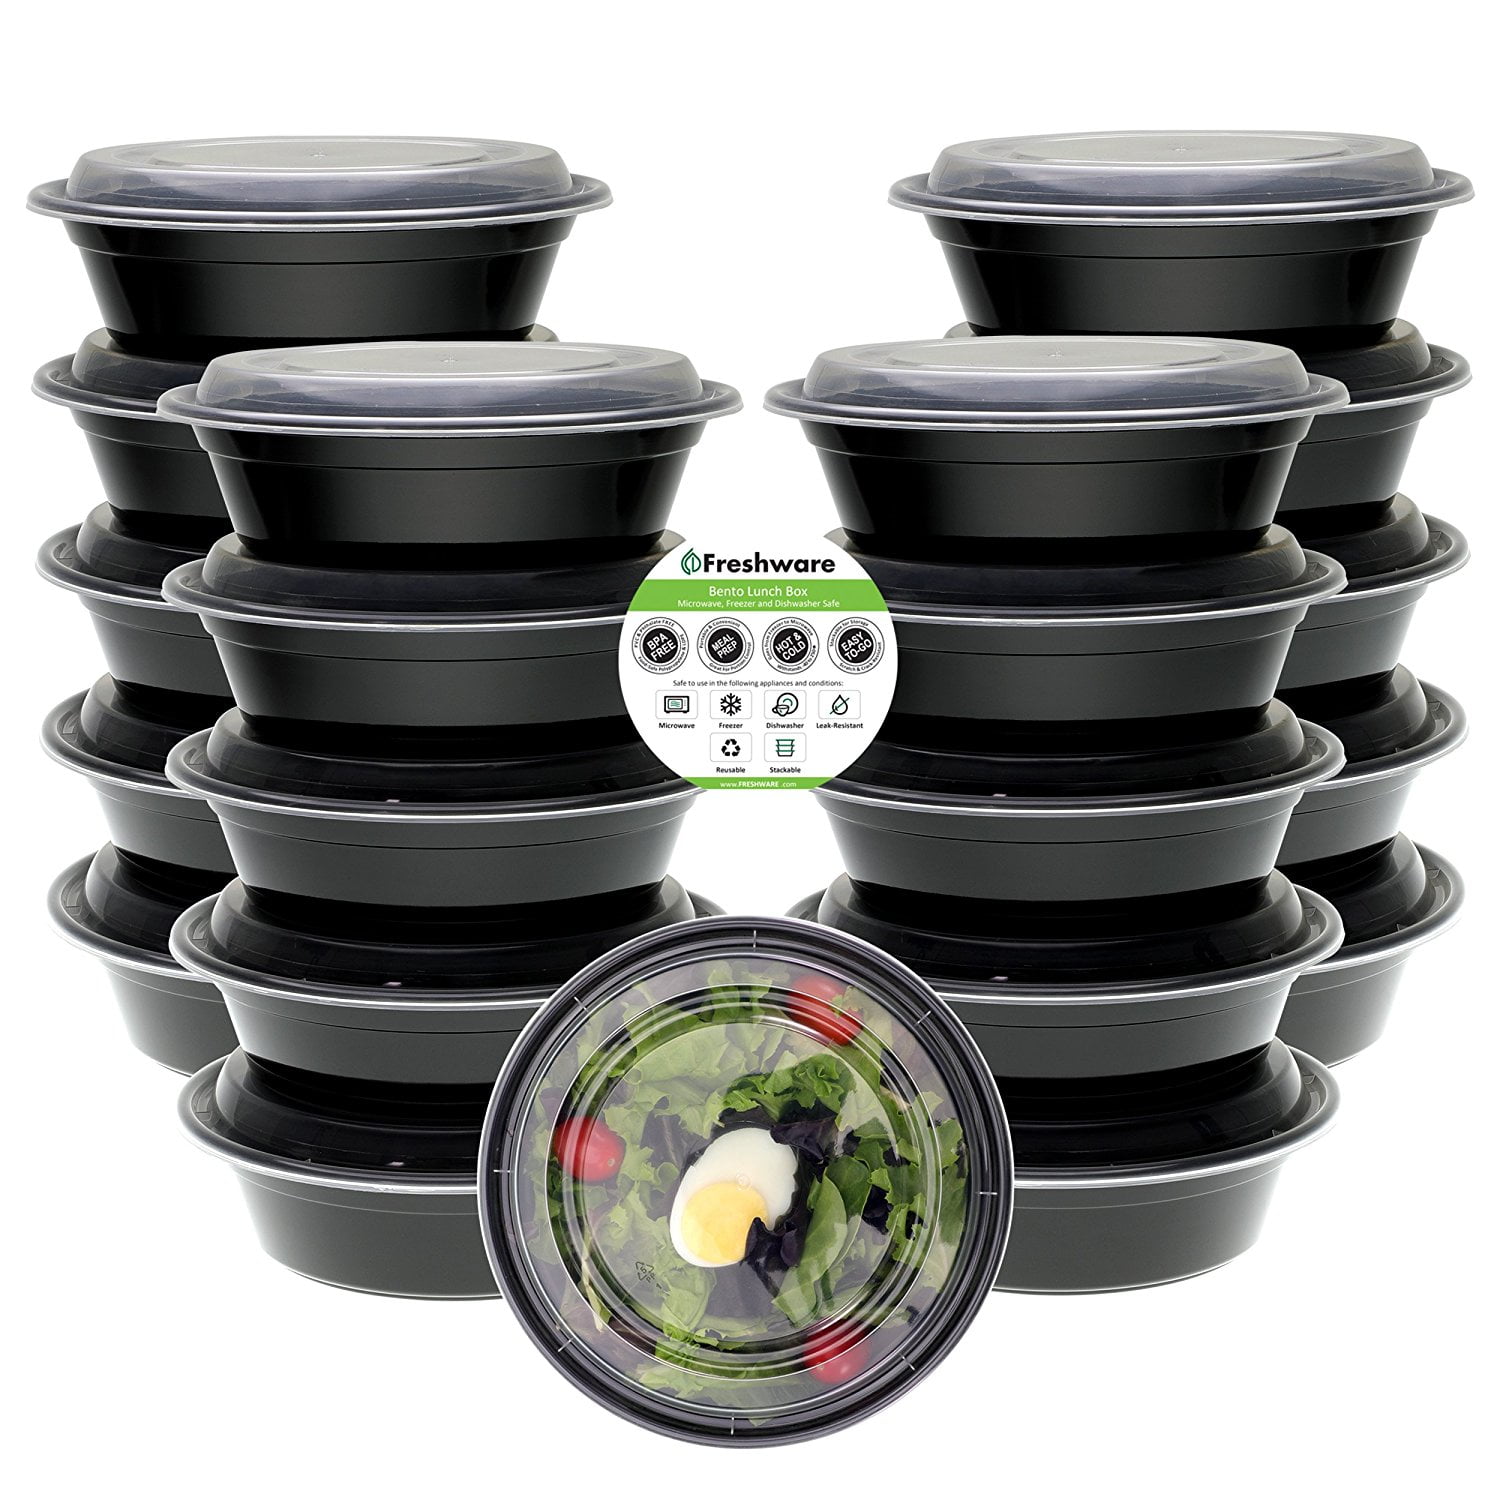 Freshware Meal Prep Containers with Lids, Set of 21 